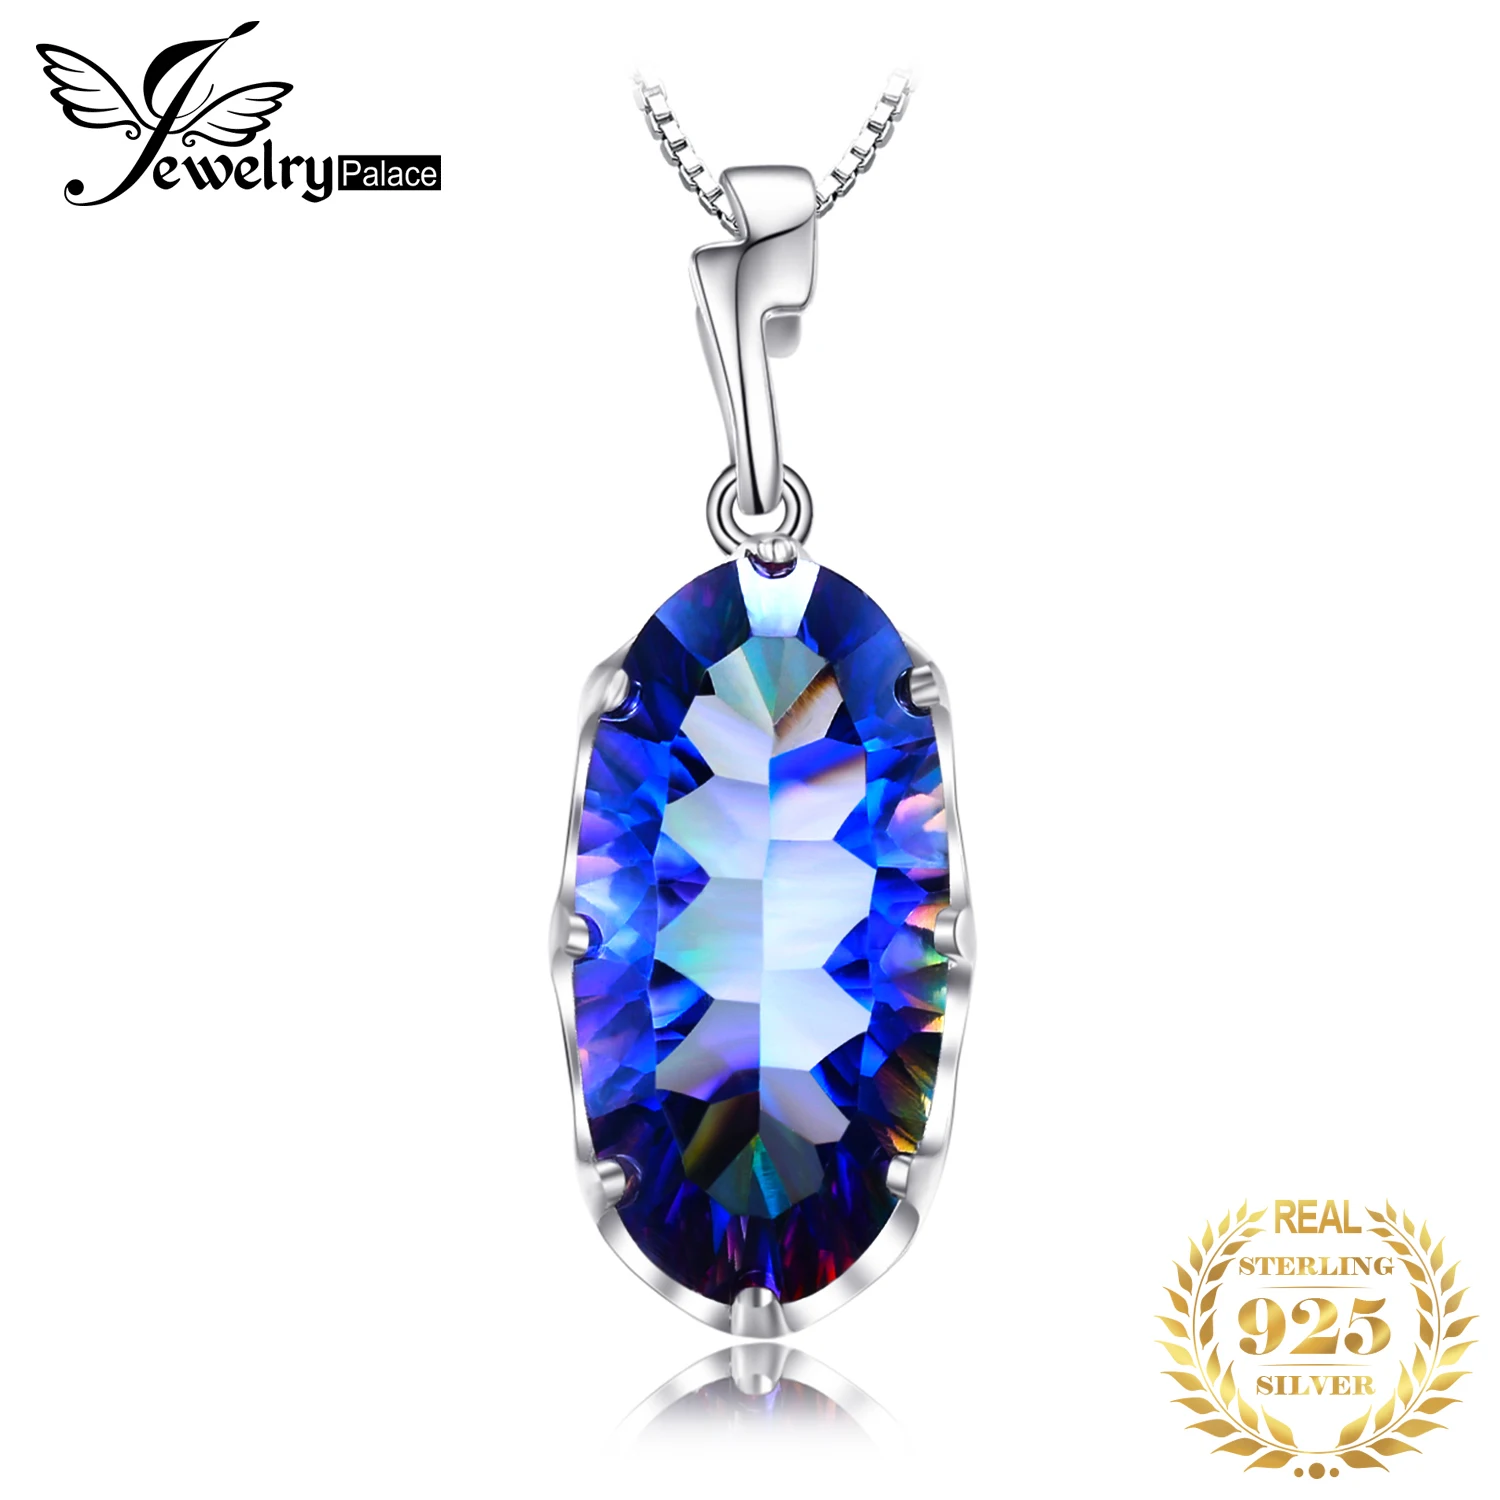 

JewelryPalace 11.8ct Genuine Mystical Blue Rainbow Topaz 925 Sterling Silver Pendant Necklace for Women Gemstone Choker No Chain